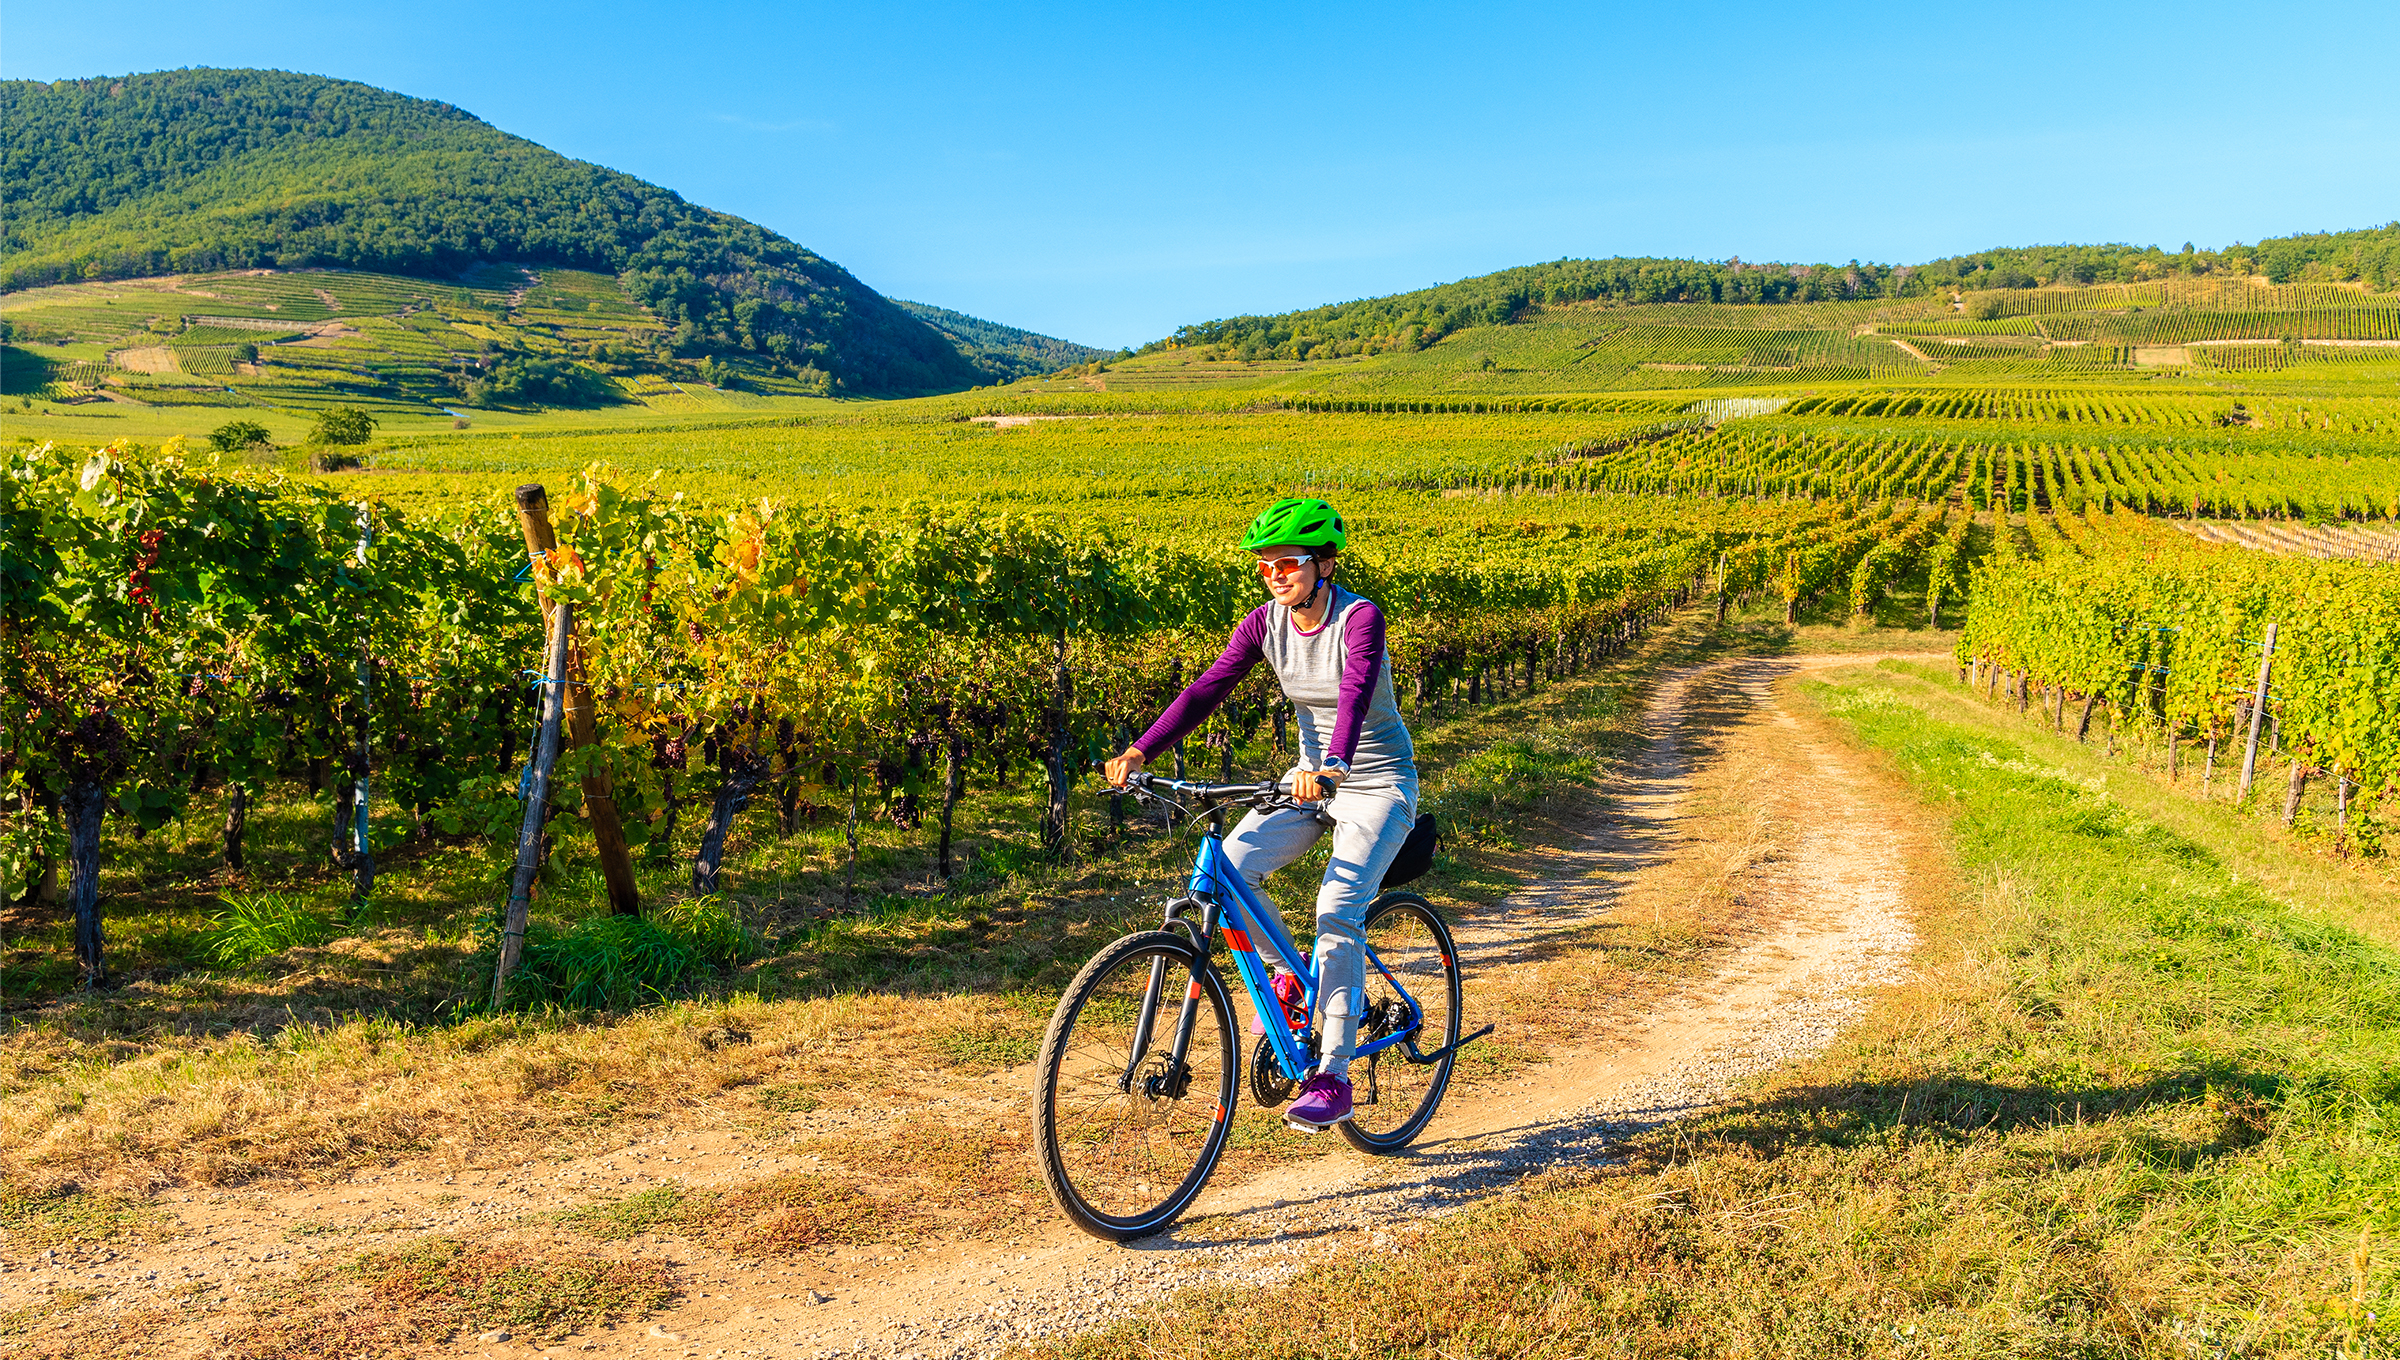 Young woman cycling on road along vineyards, France